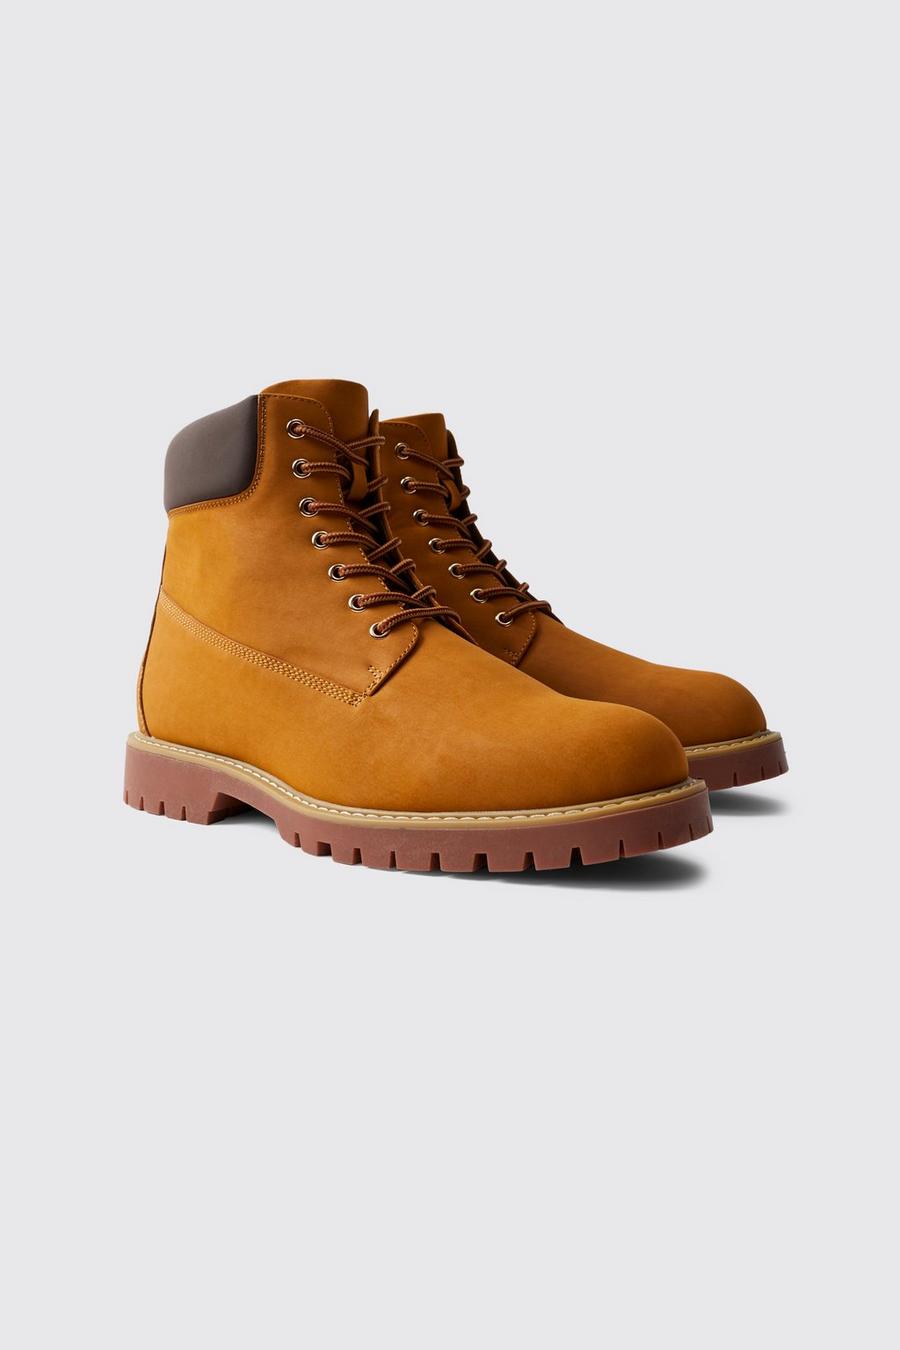 Tan brown Worker Boots